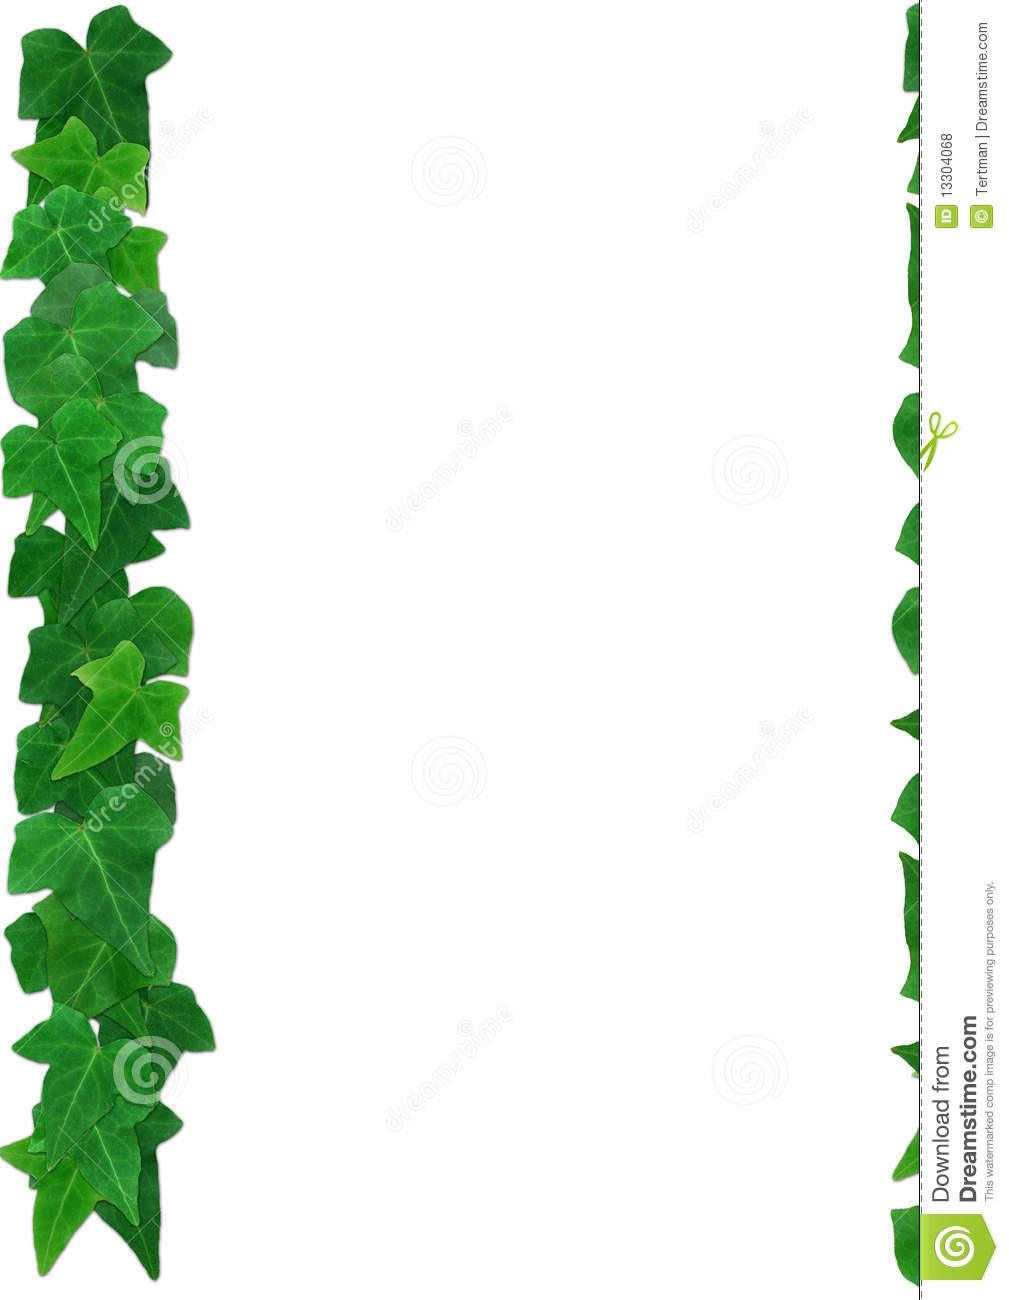 English Ivy Leaves Frame On A White Background Royalty Free Stock    